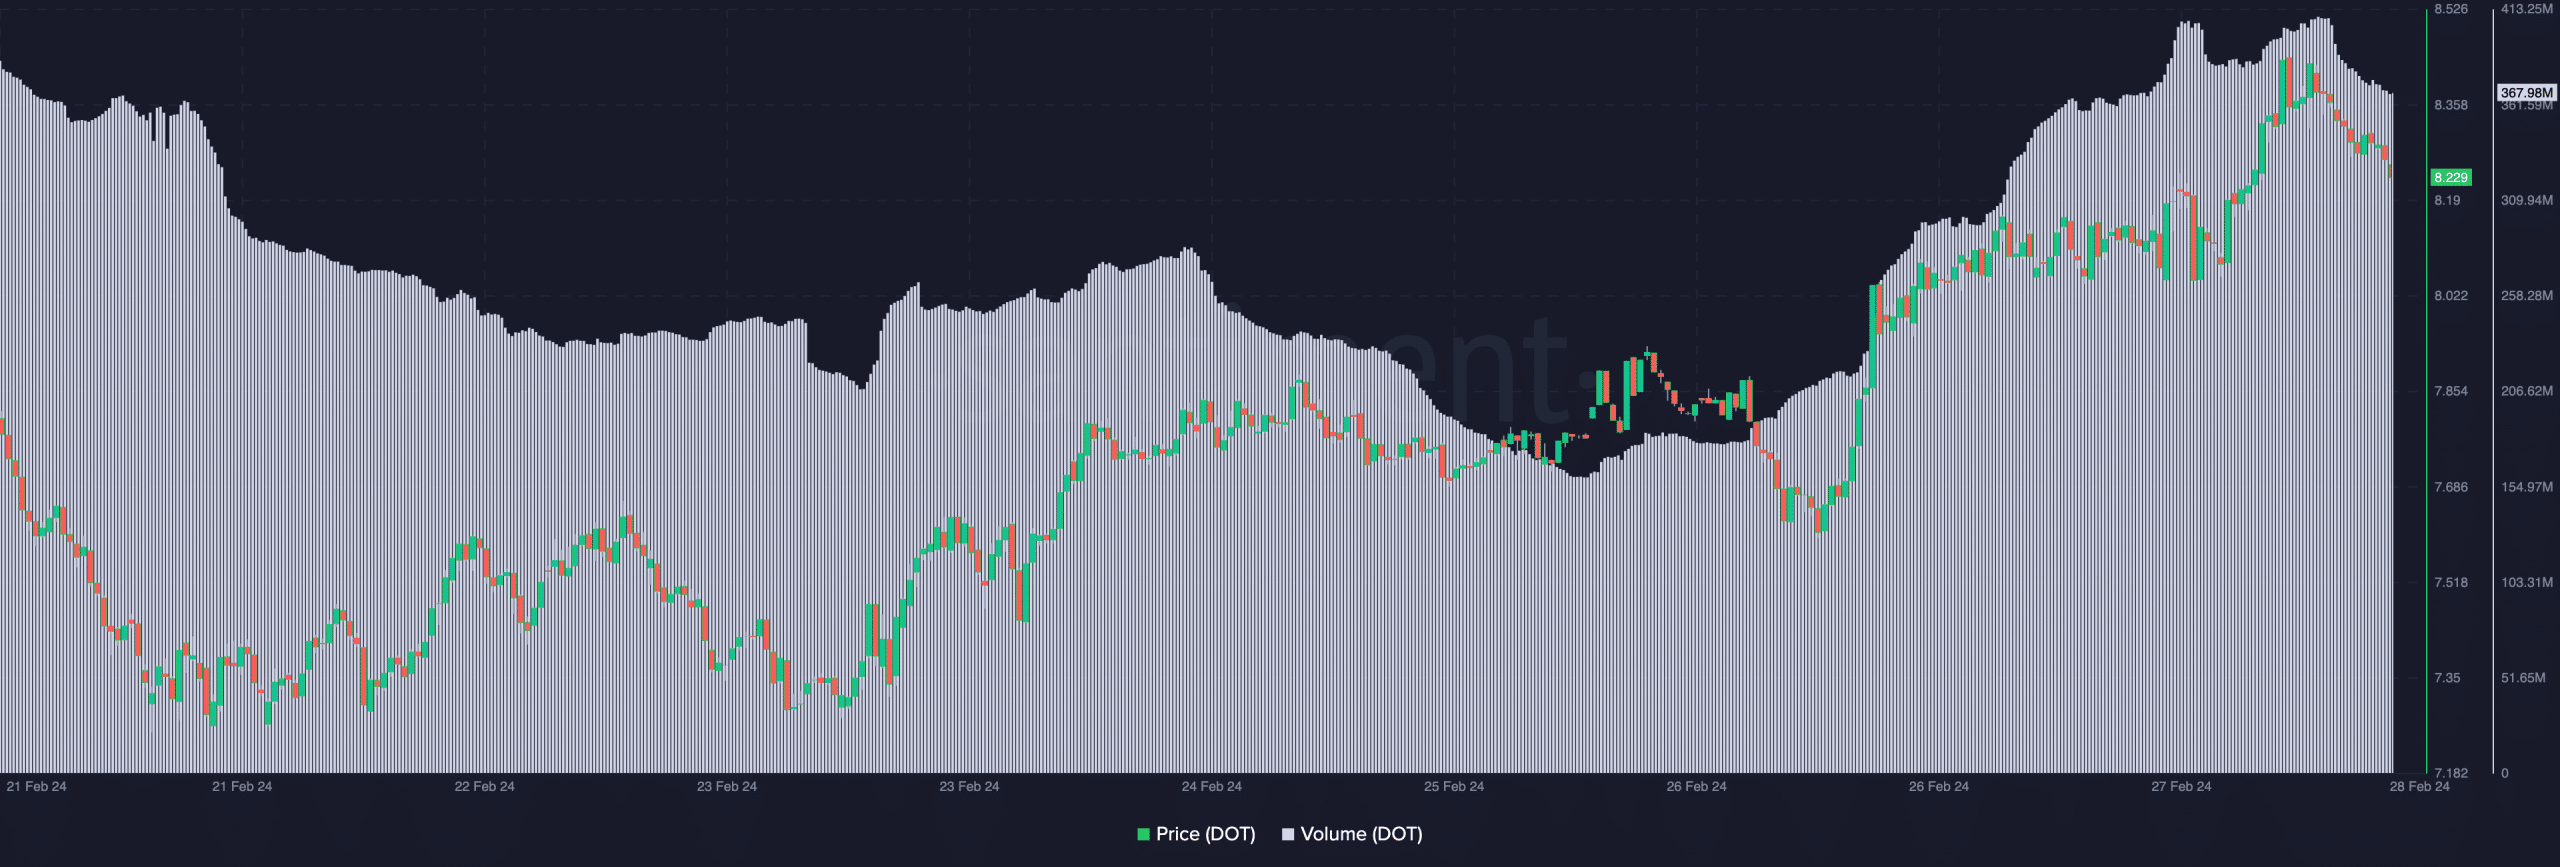 Polkadot rising volume and declining price, indicating a potential price decrease